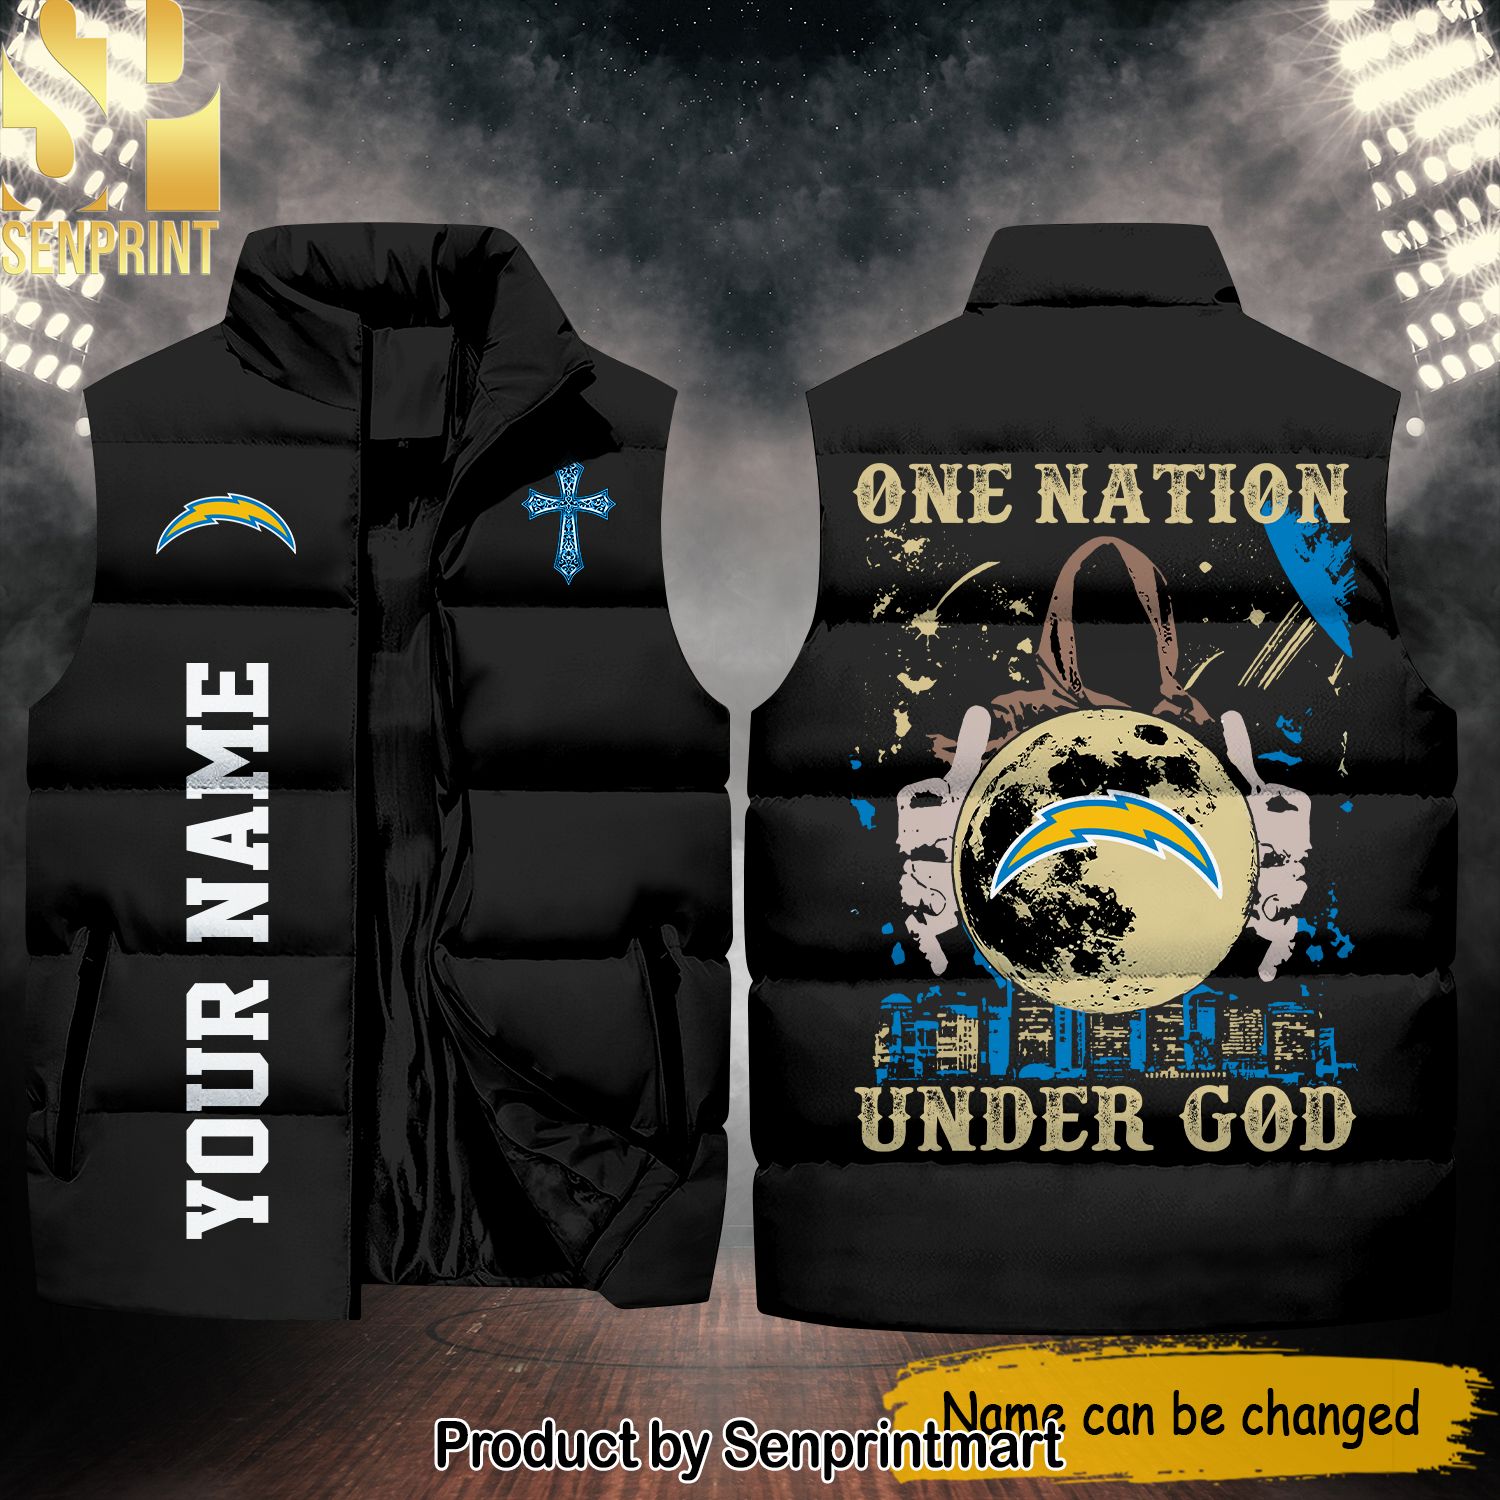 National Football League Los Angeles Chargers One Nation Under God Hot Outfit Sleeveless Jacket